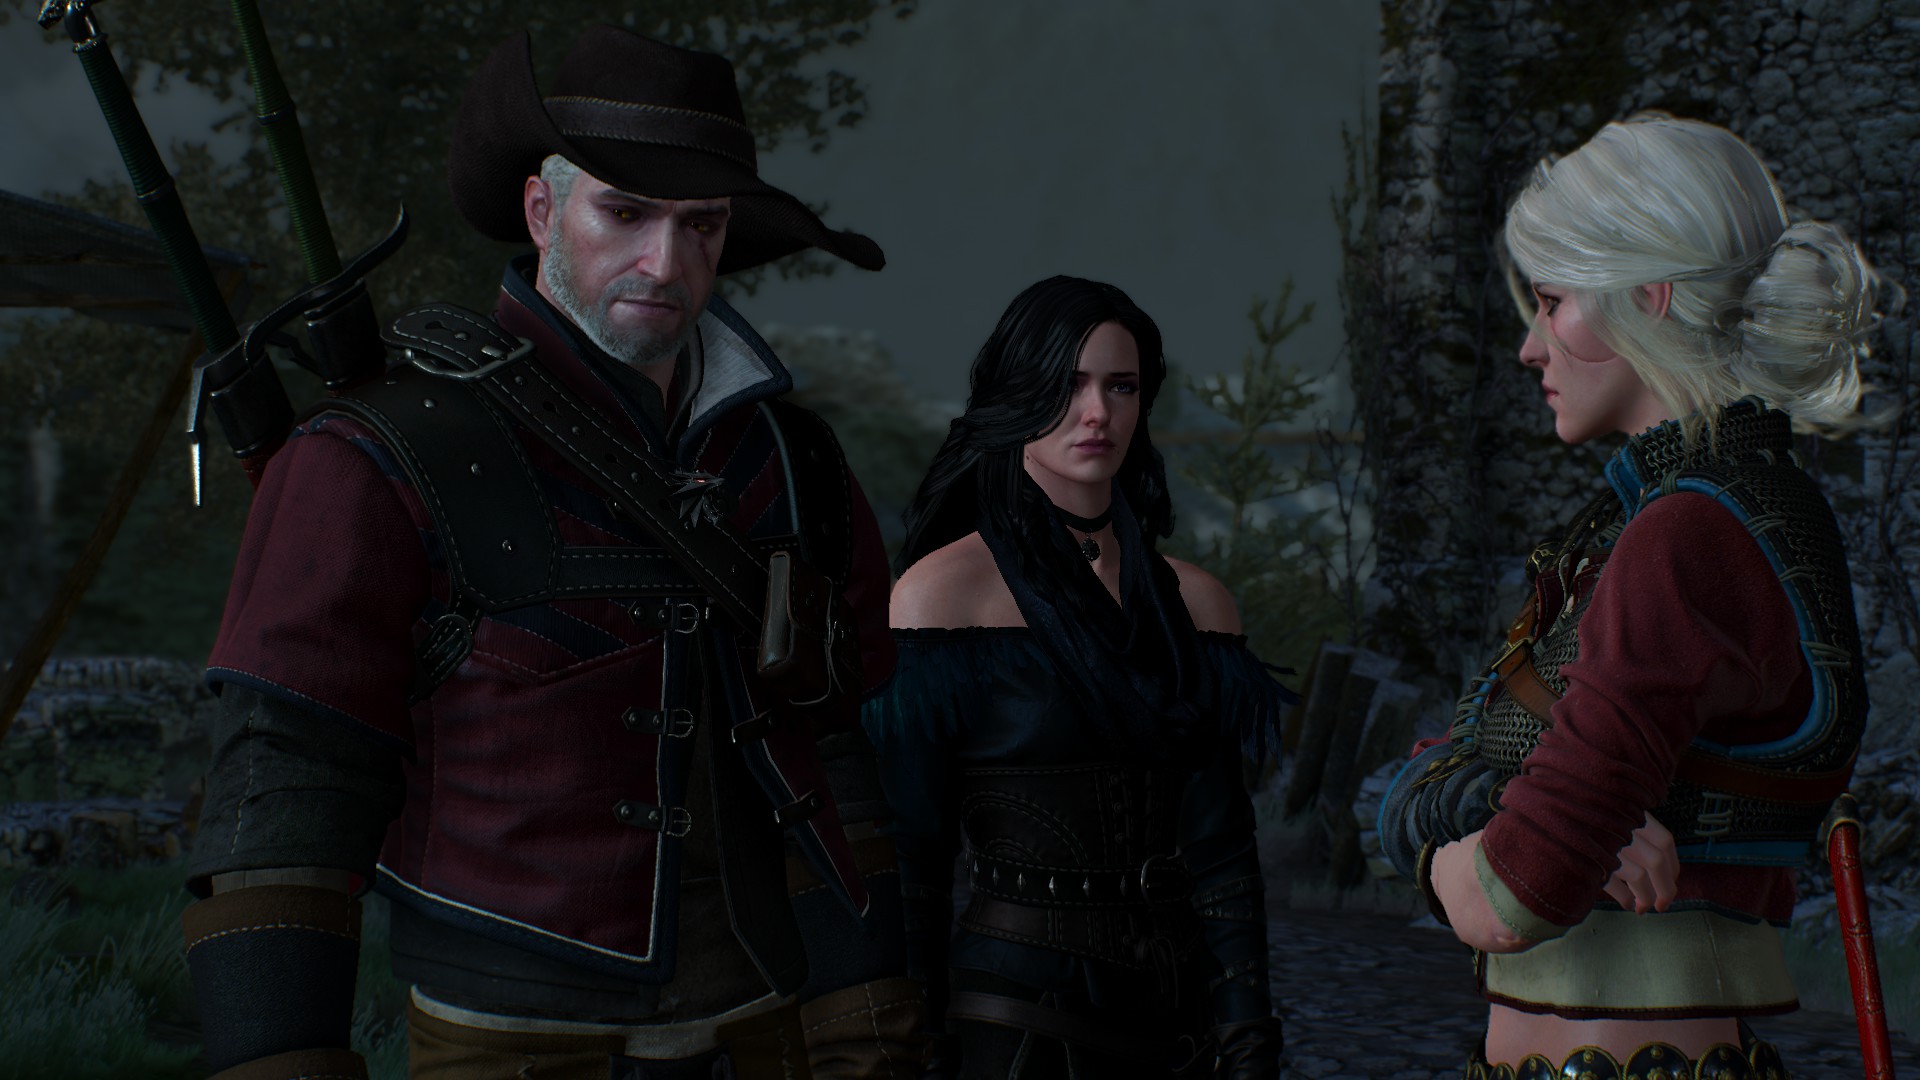 General 1920x1080 The Witcher 3: Wild Hunt School of the Wolf CD Projekt RED Cirilla Fiona Elen Riannon Yennefer of Vengerberg Geralt of Rivia video games video game characters